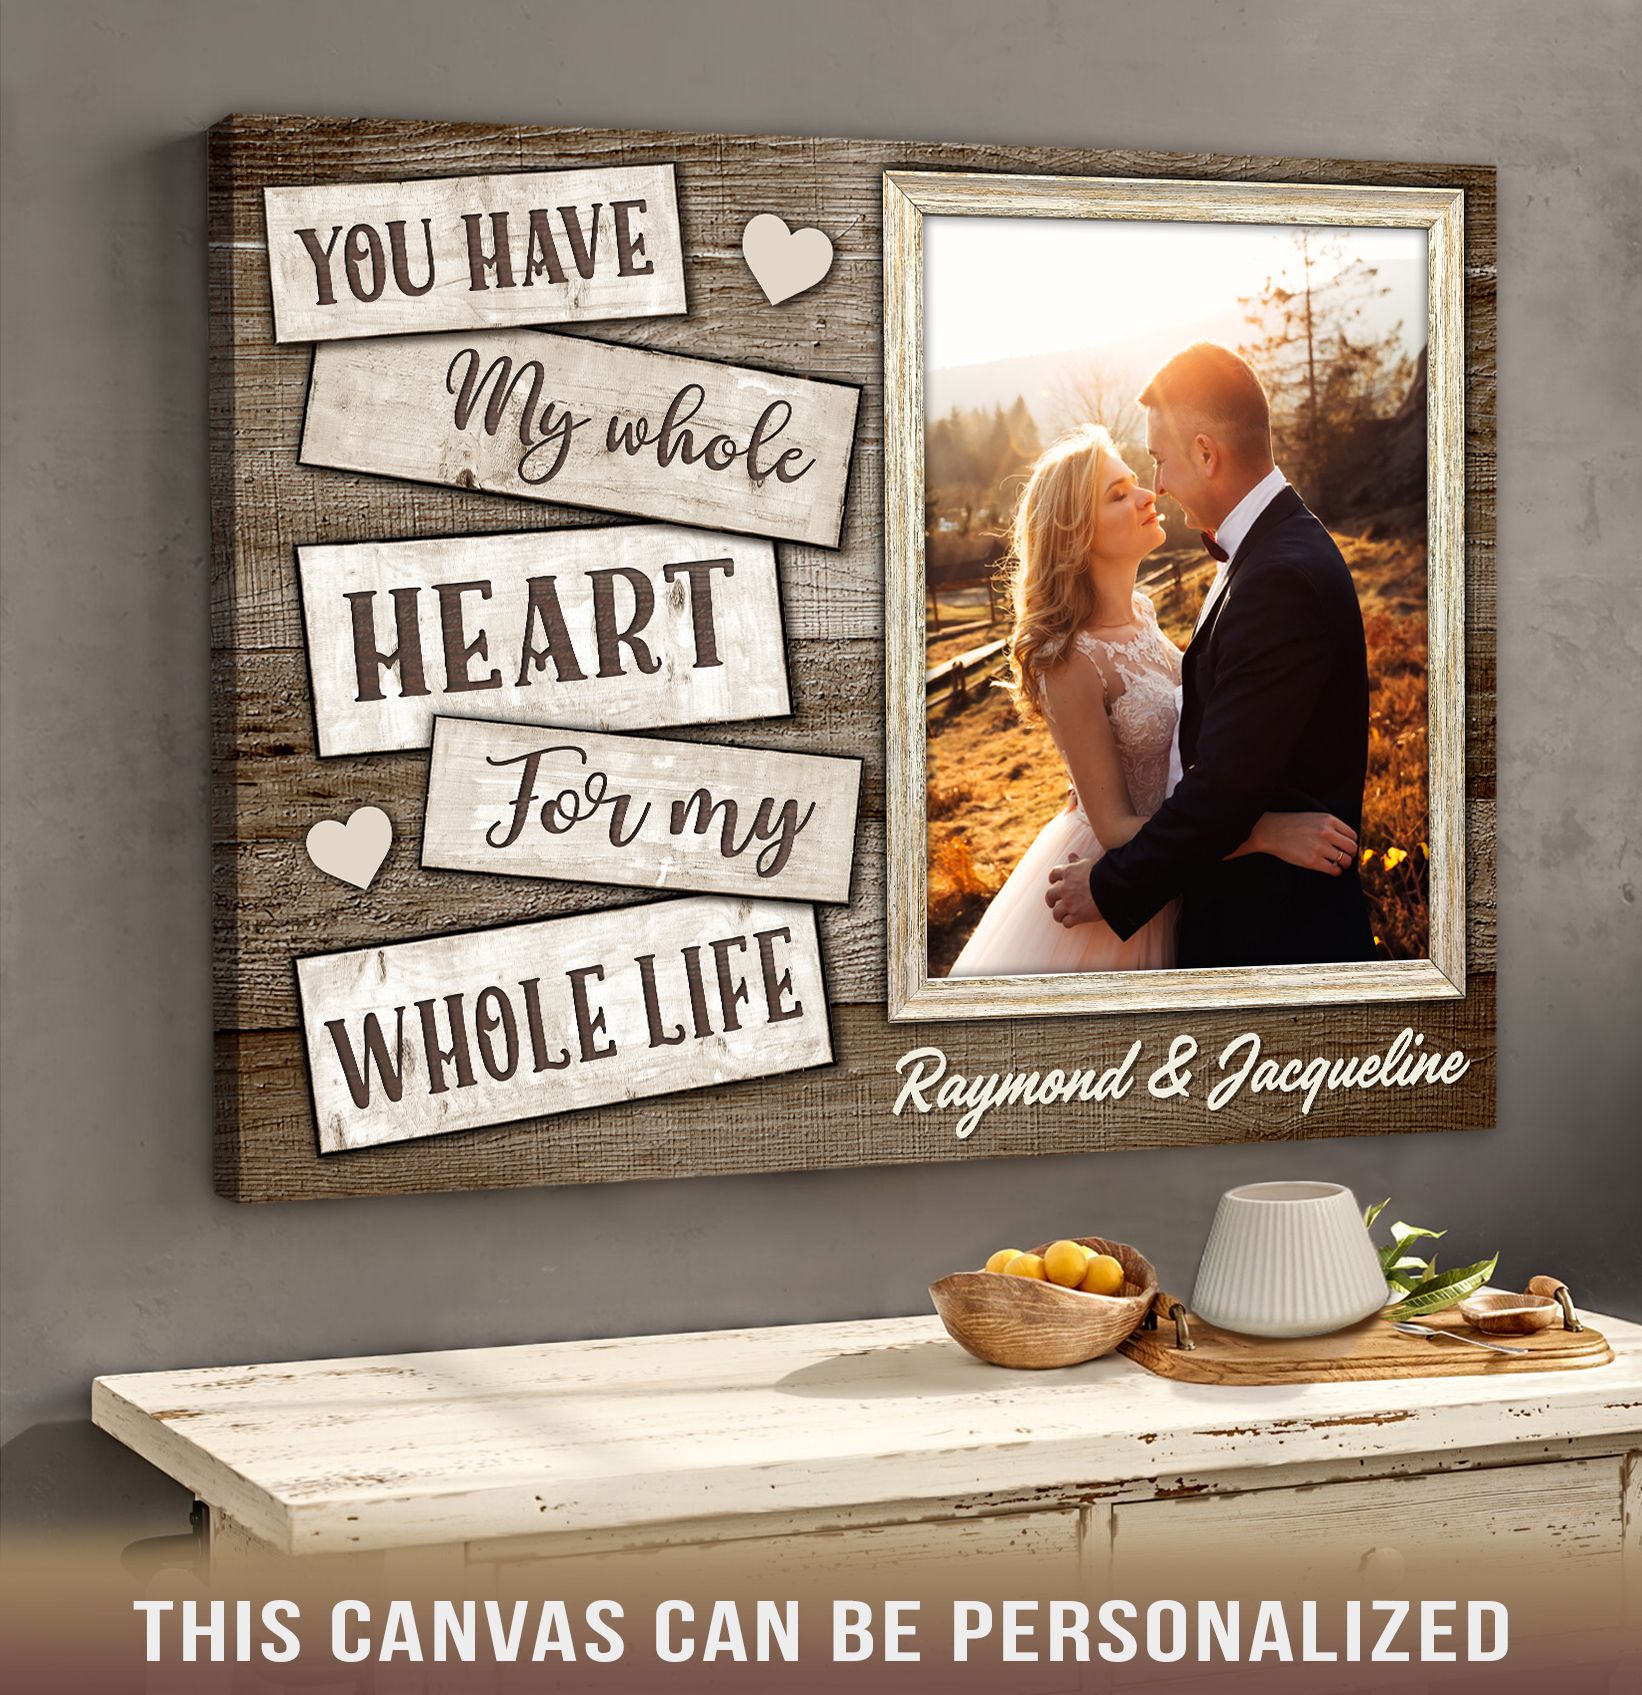 Personalized Two Hearts, One Love Mini Canvas on Easel- Personal Creations Customized Canvas Wall Art Home Décor Gifts